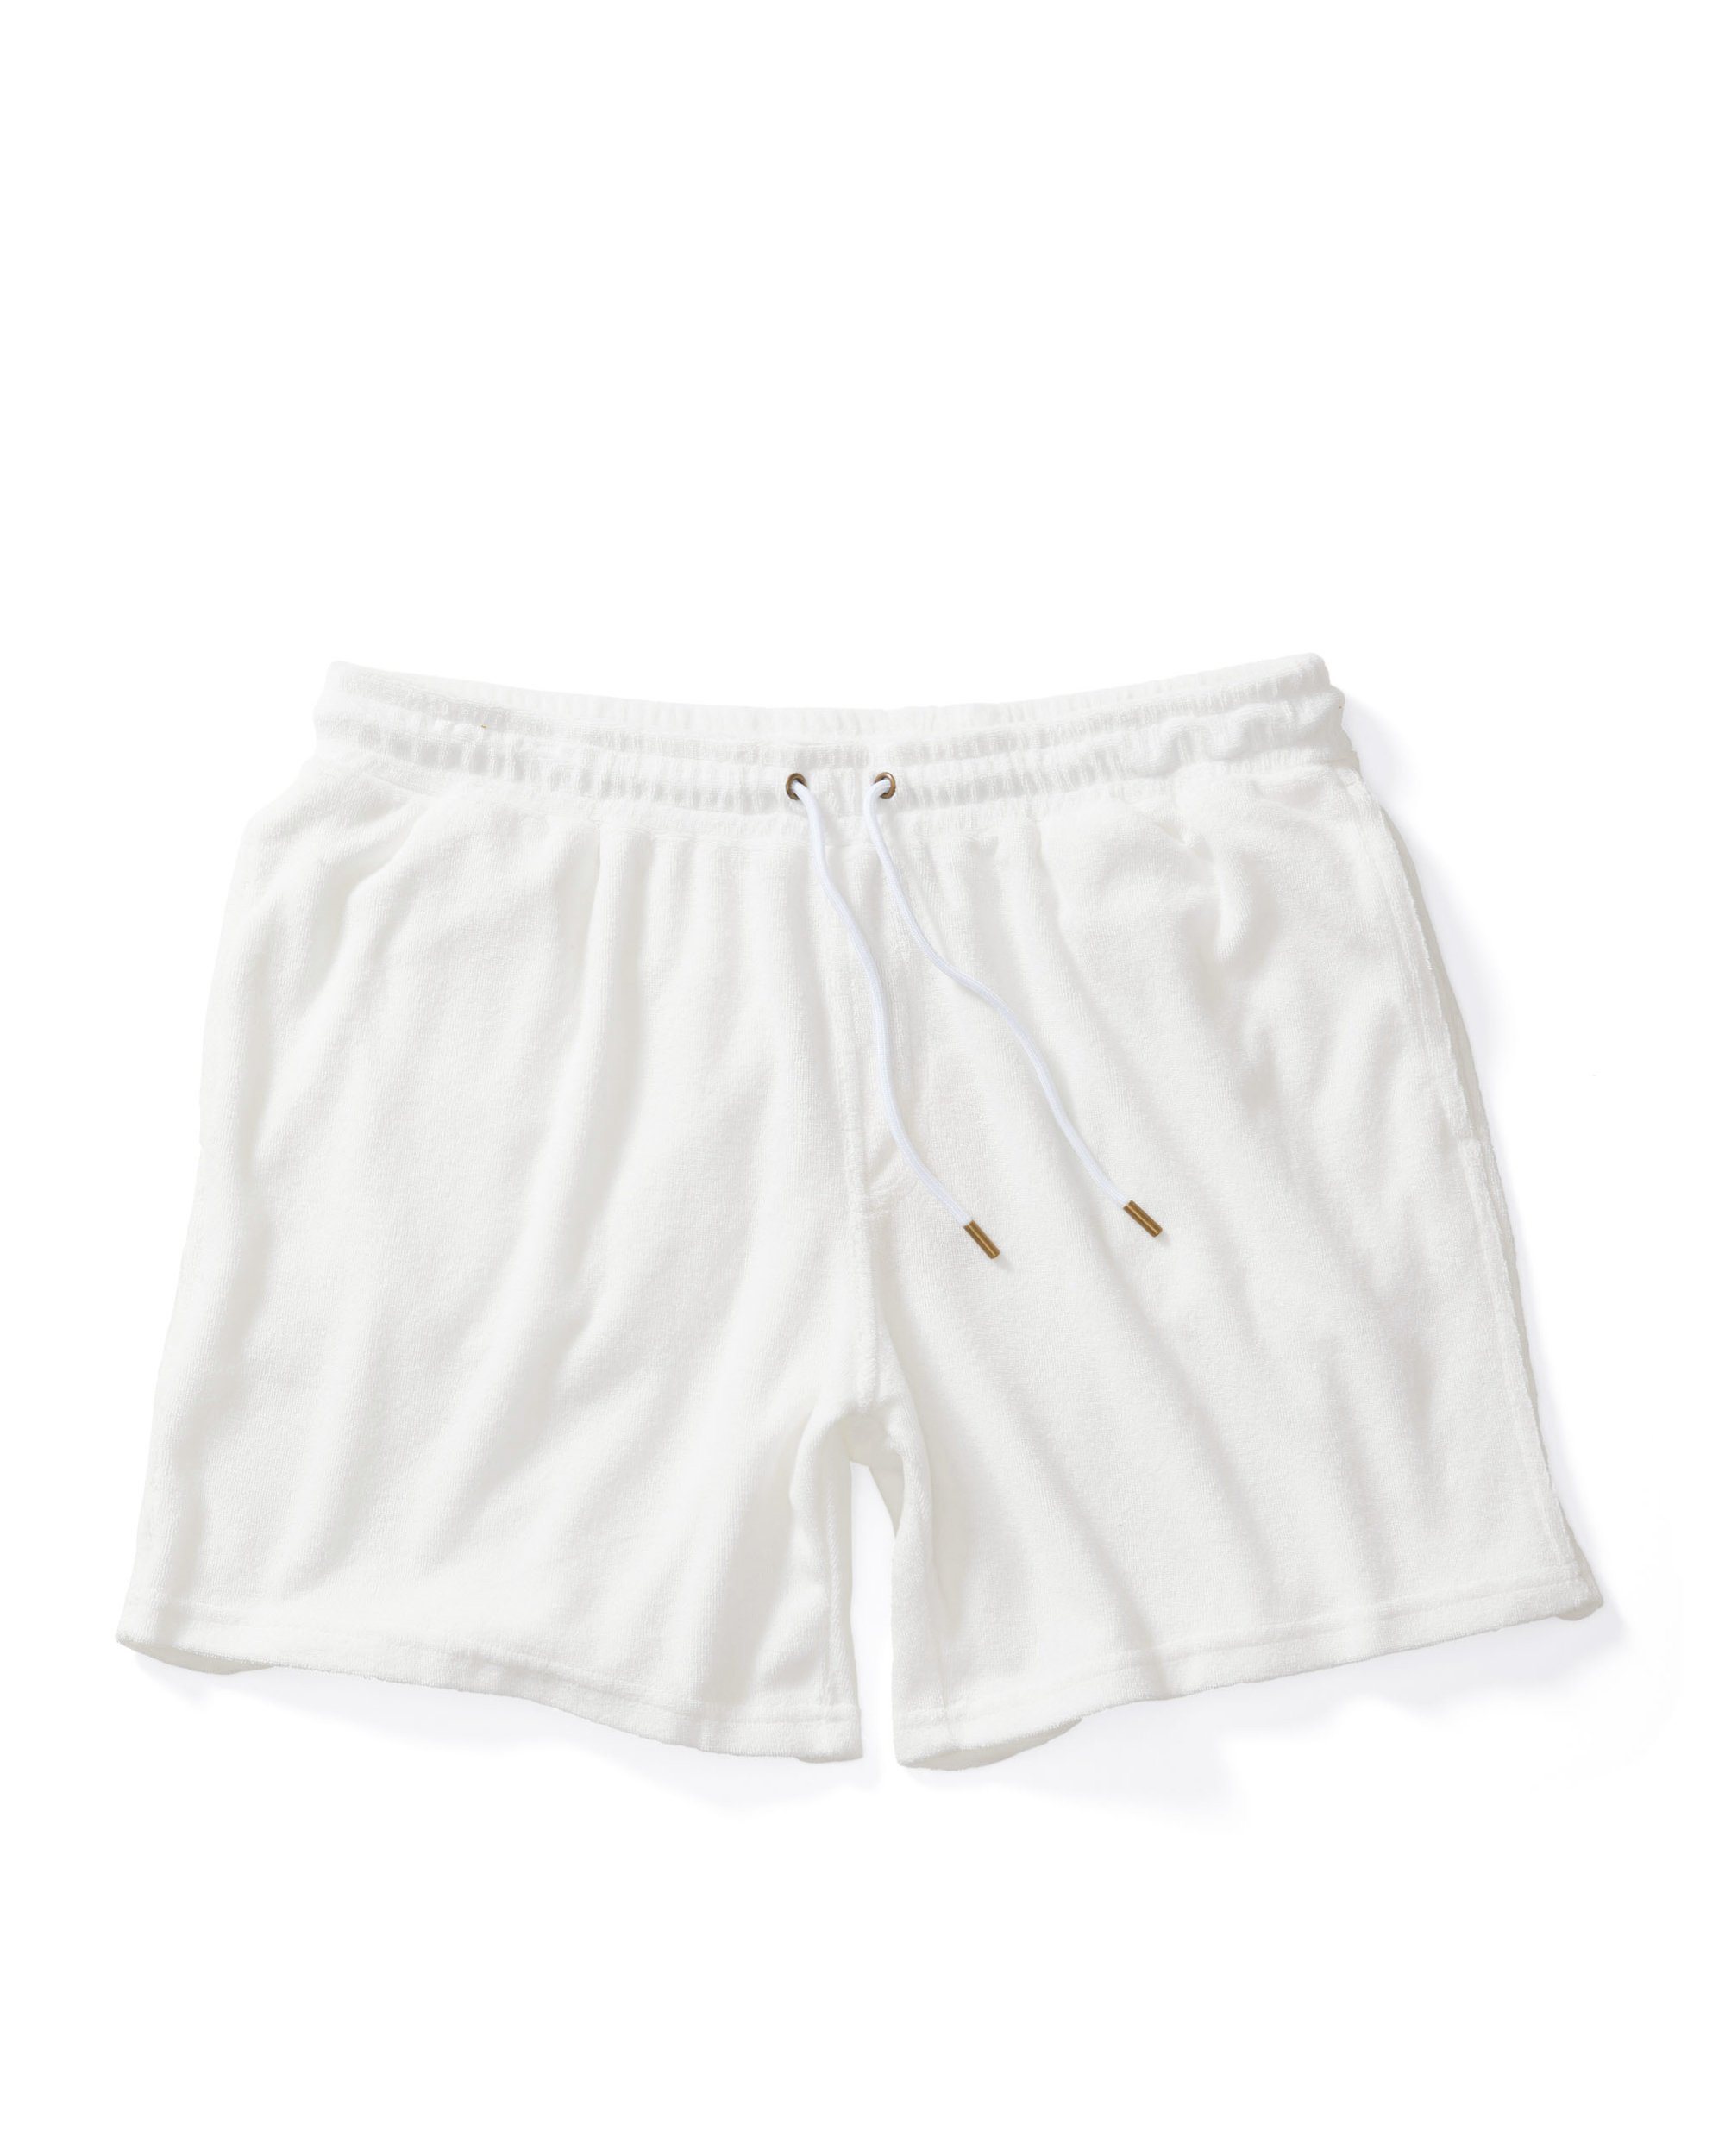 Image of The Tropez Terry Cloth Shorts - Vintage Ivory